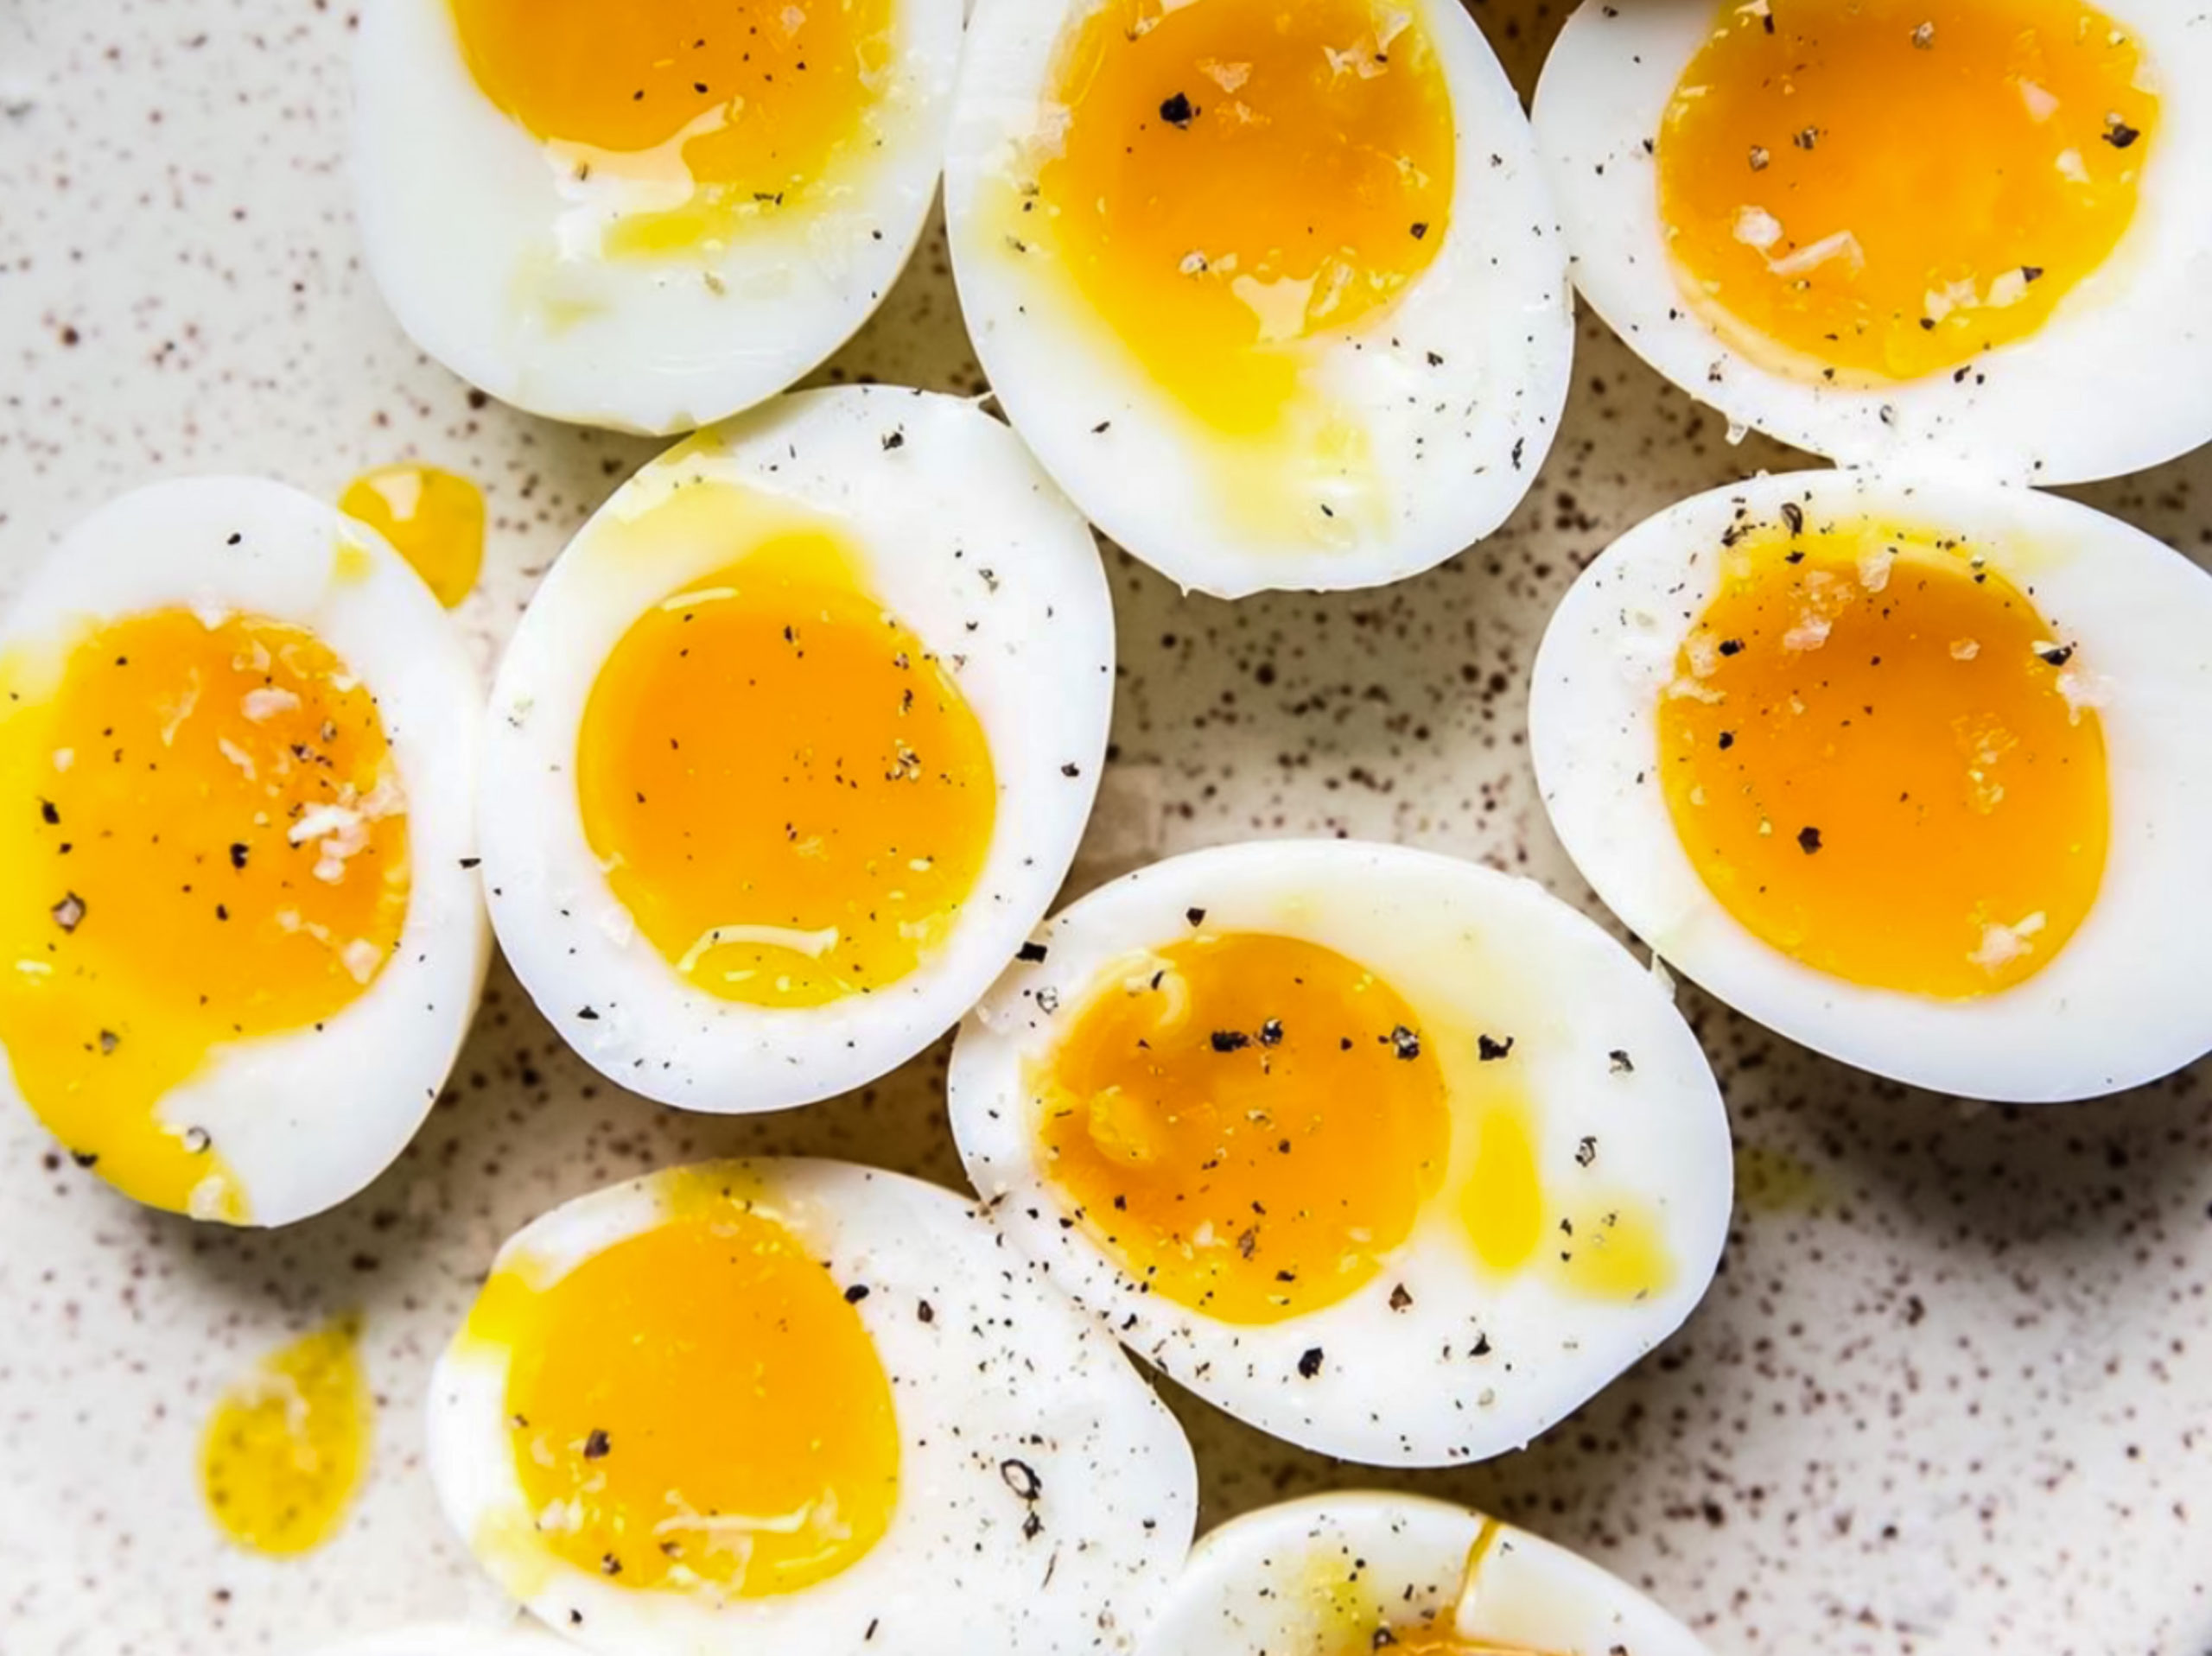 Why Would You Ever Poach an Egg When You Could Soft-Boil It?